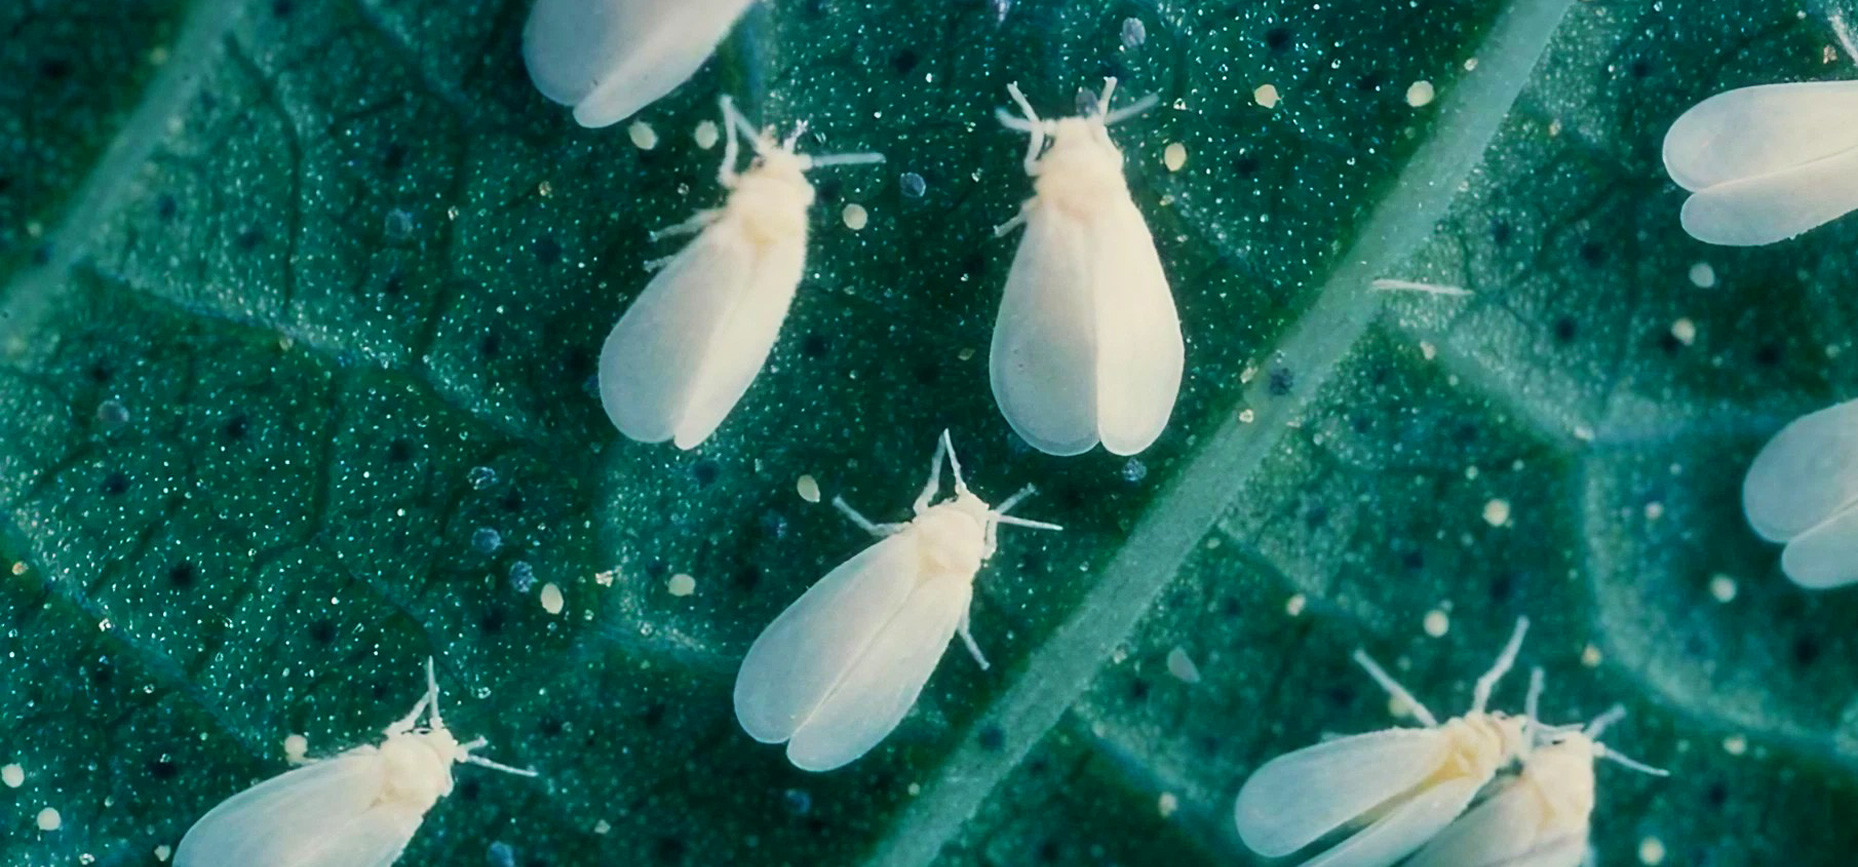 How to control whitefly in indoor cultivation?